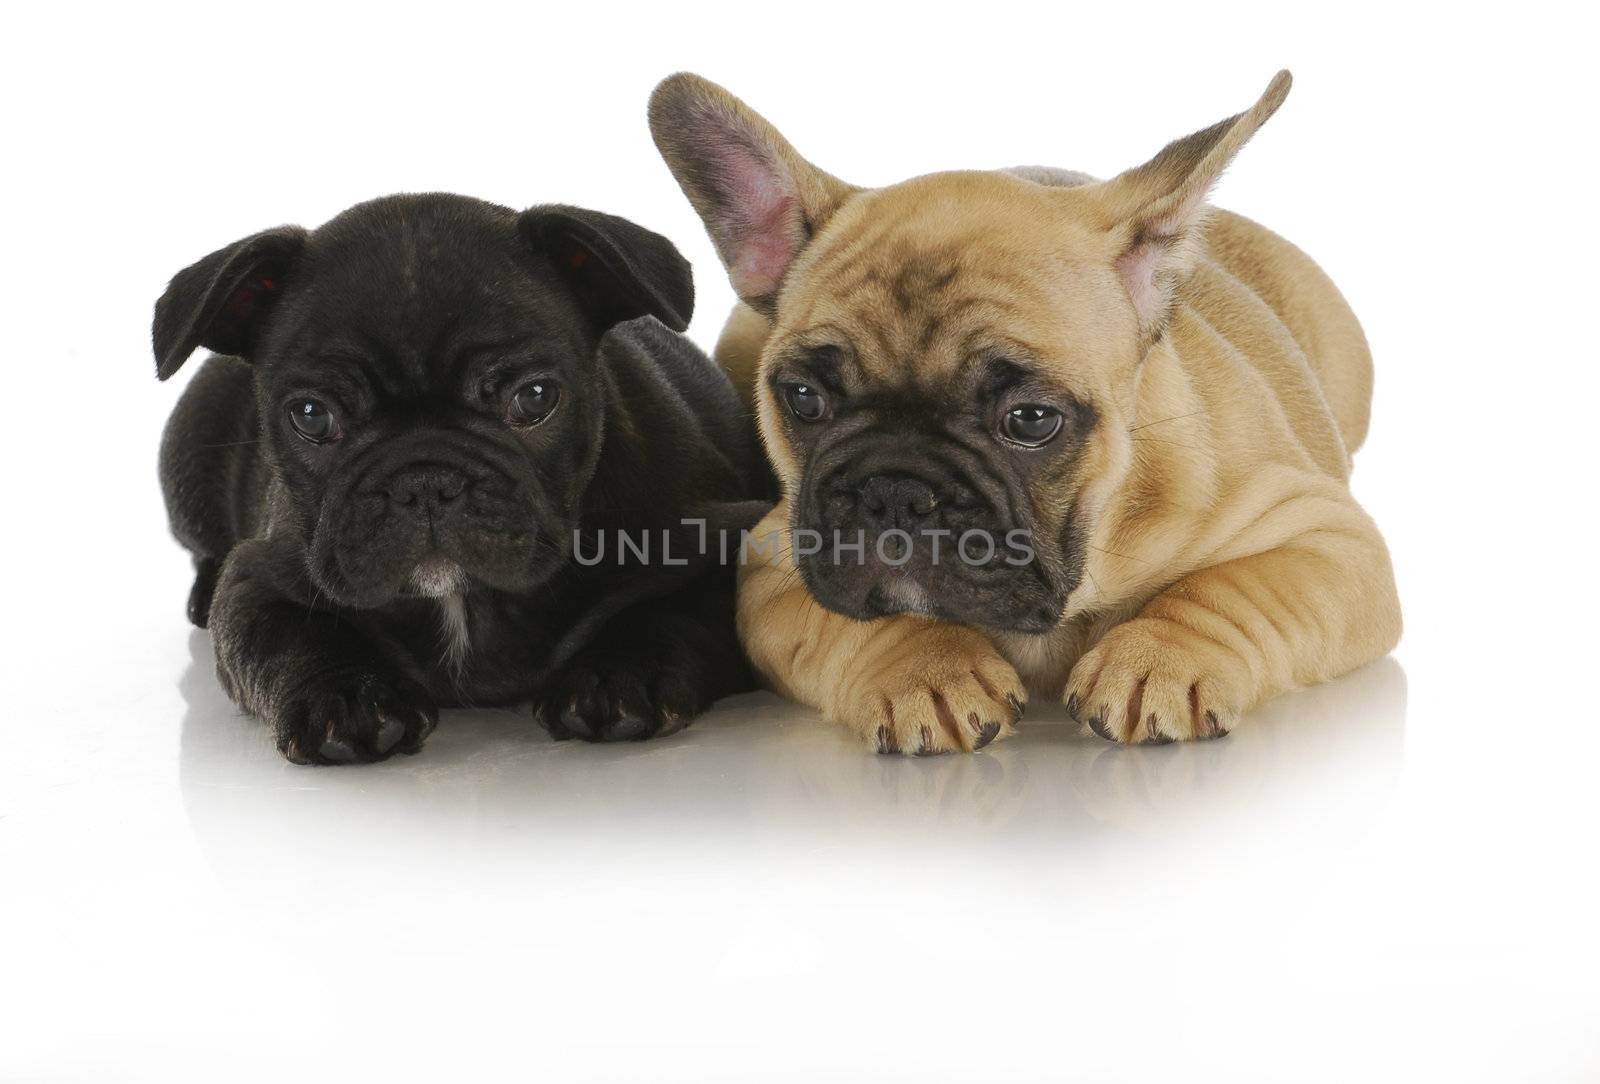 littermates - two french bulldog puppies on white background - 8 weeks old